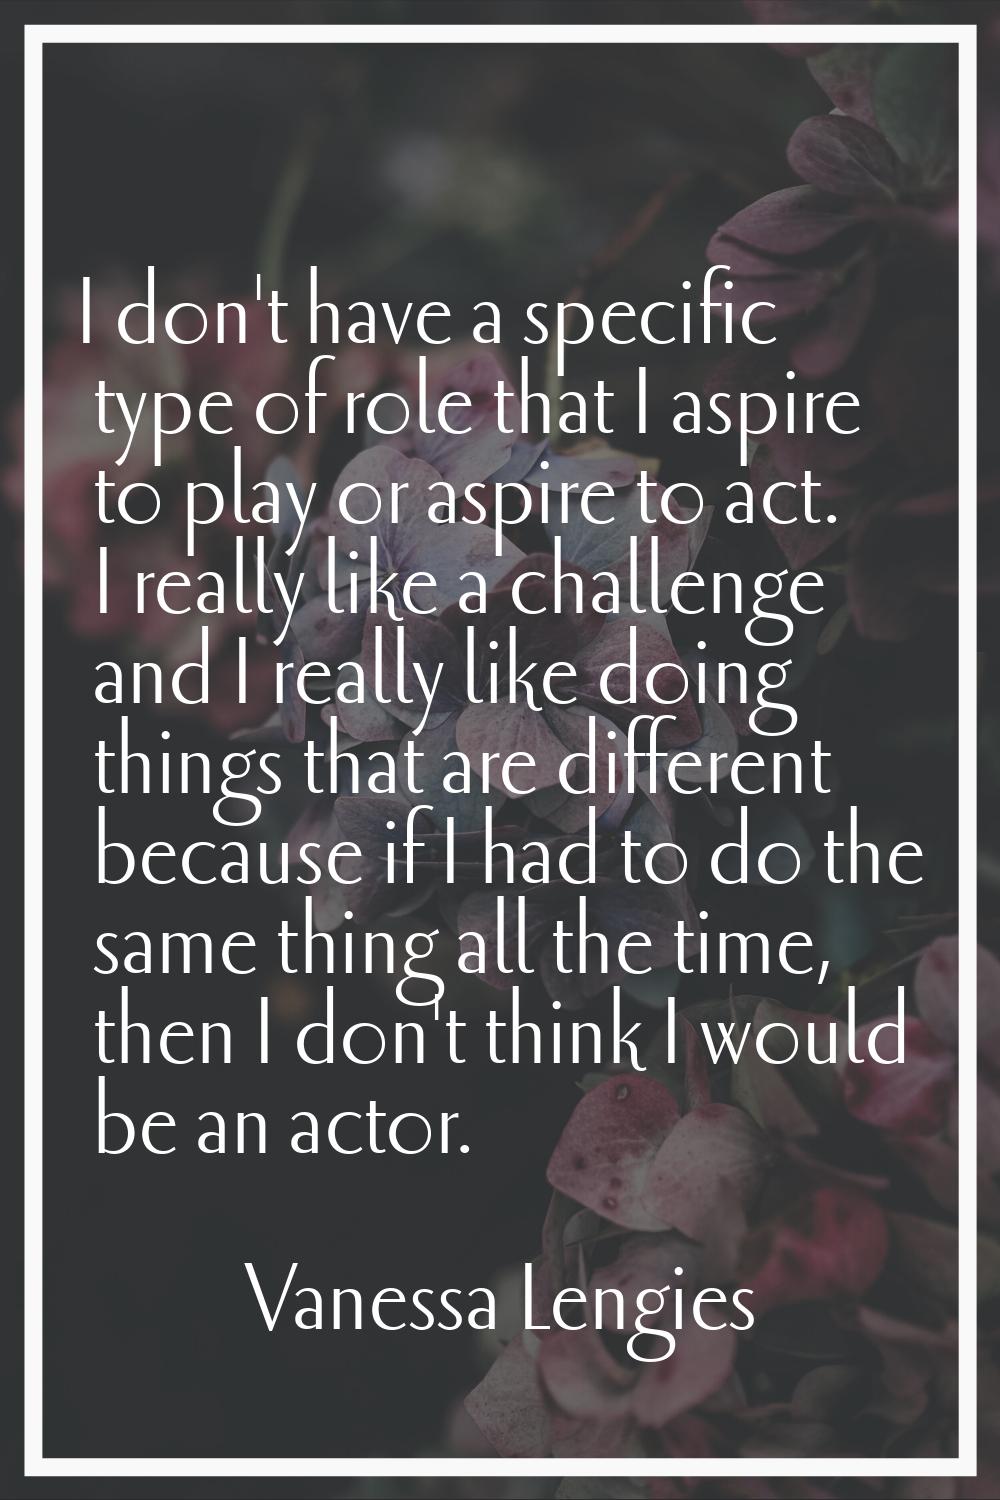 I don't have a specific type of role that I aspire to play or aspire to act. I really like a challe